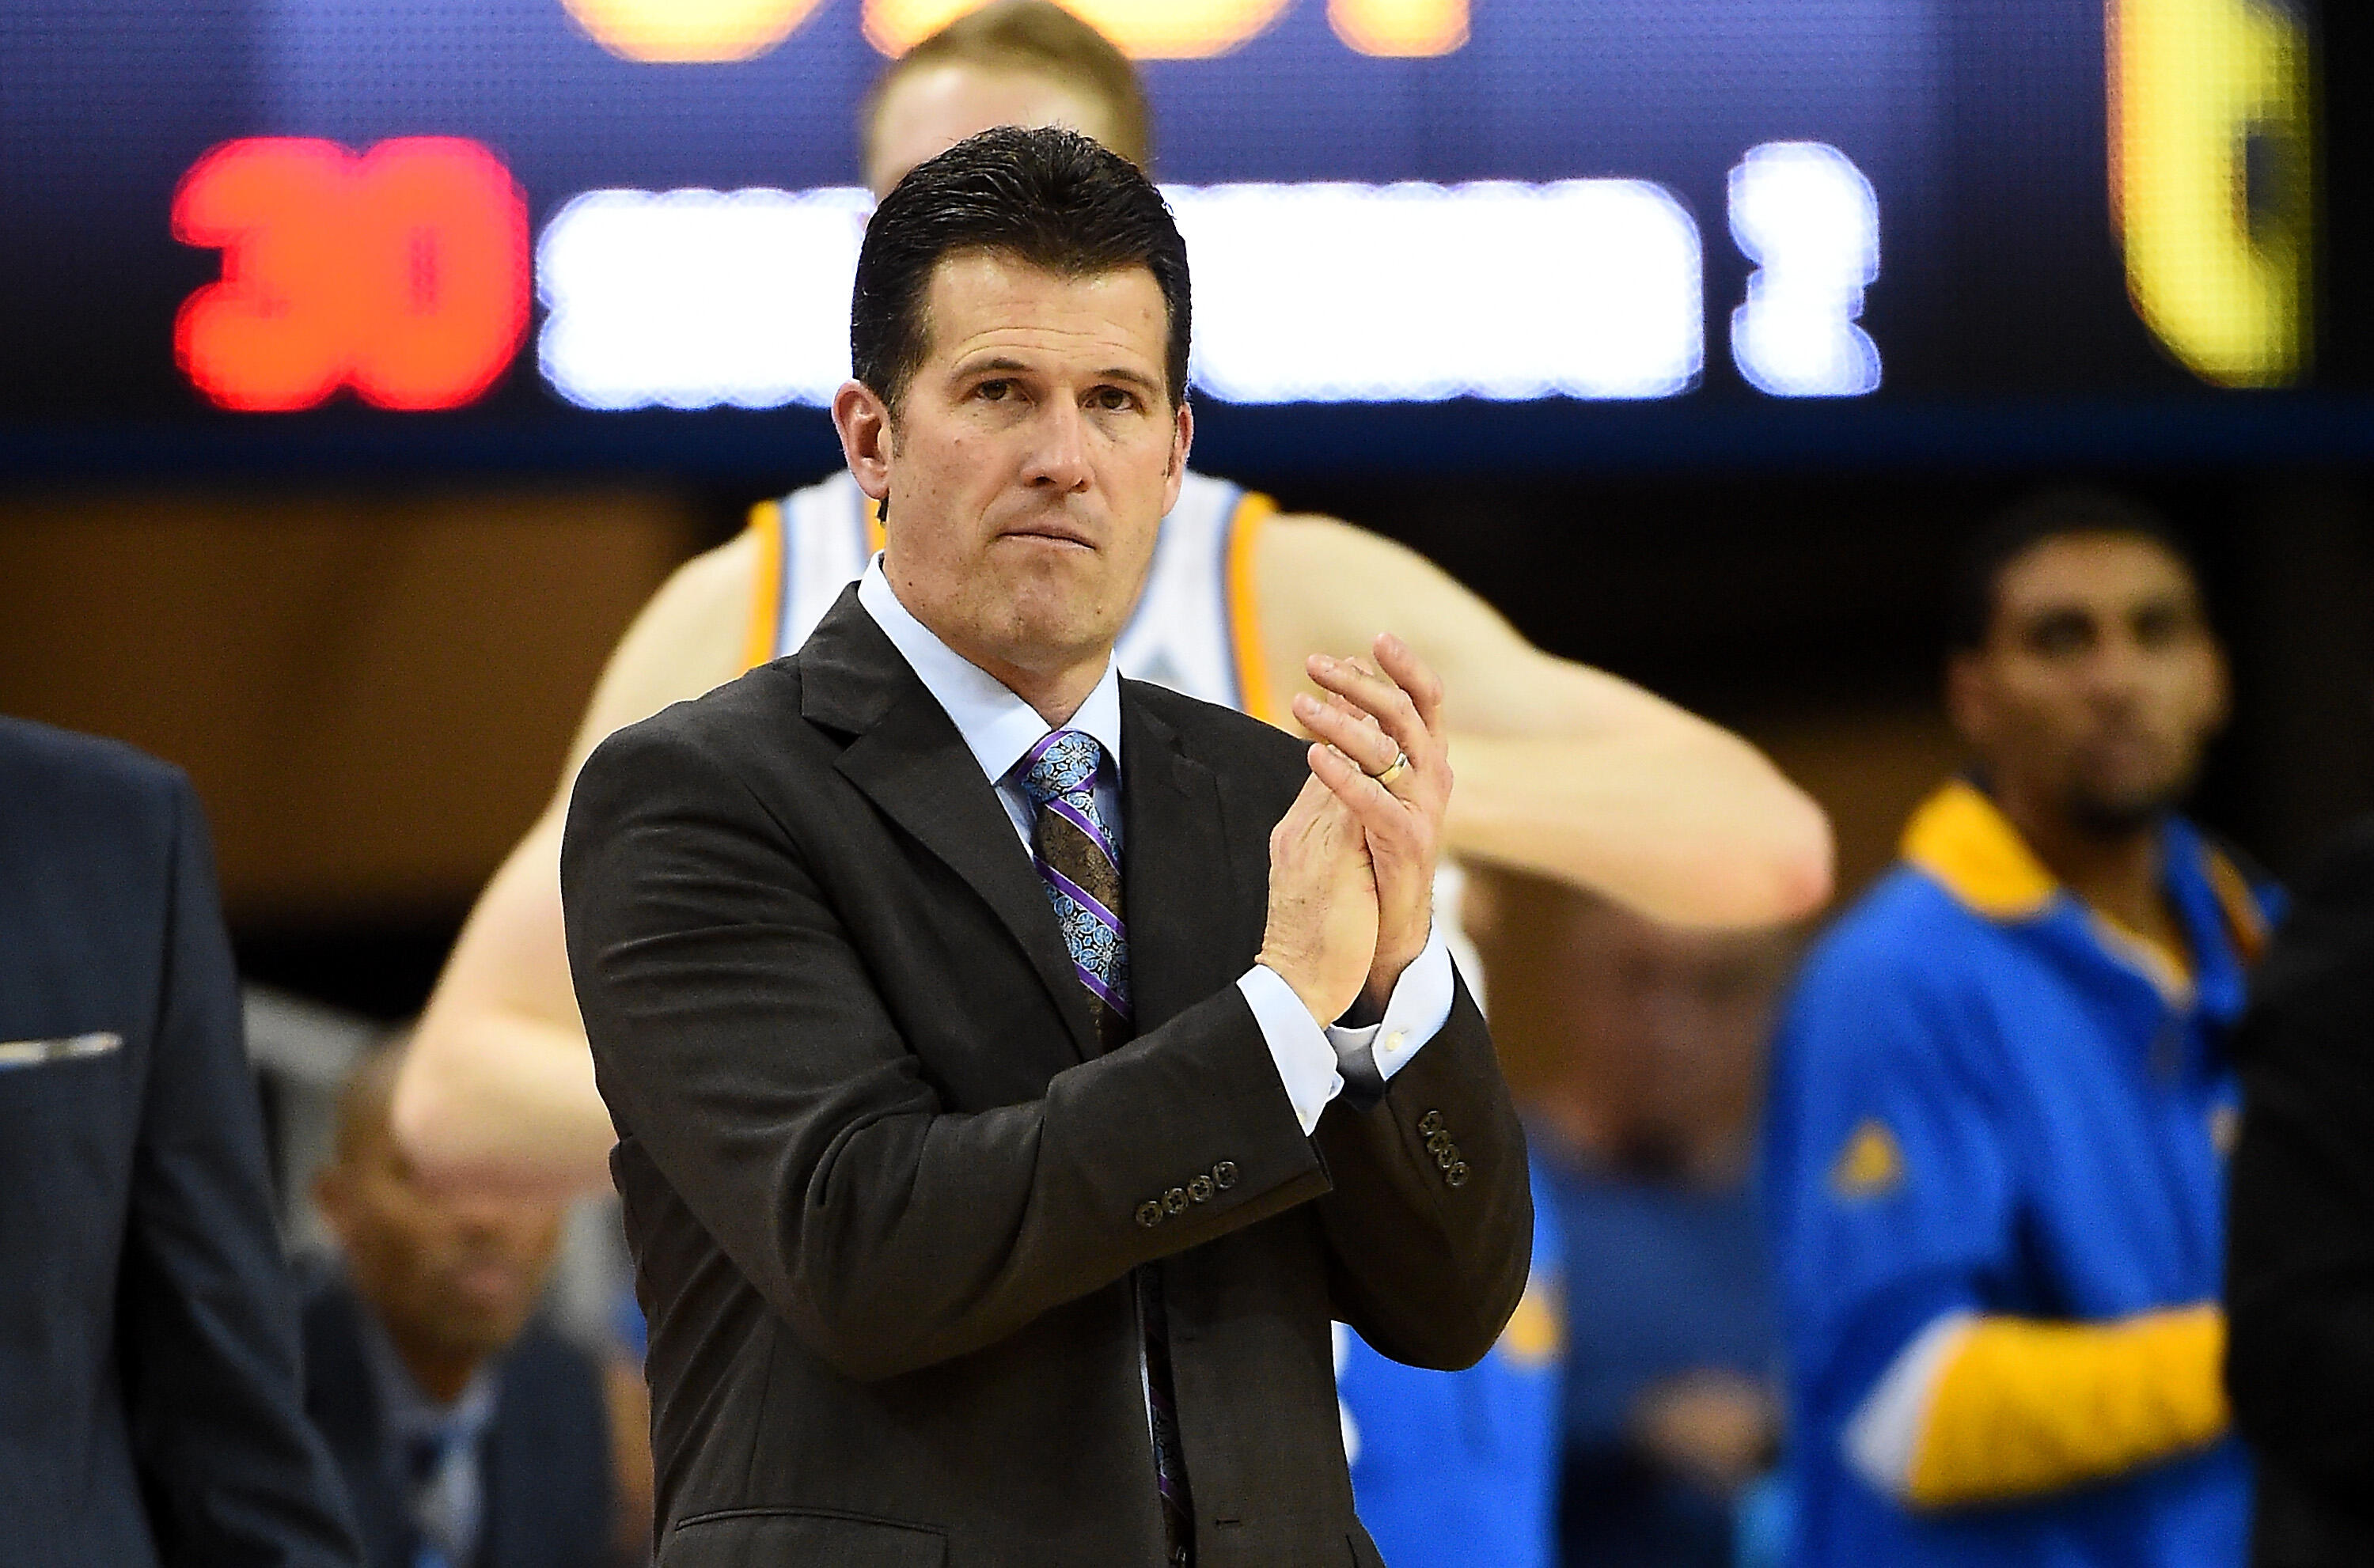 LOS ANGELES, CA - JANUARY 19:  Head coach Steve Alford of the UCLA Bruins applauds during a timeout in the game against the Arizona State Sun Devils  at Pauley Pavilion on January 19, 2017 in Los Angeles, California.  (Photo by Jayne Kamin-Oncea/Getty Ima